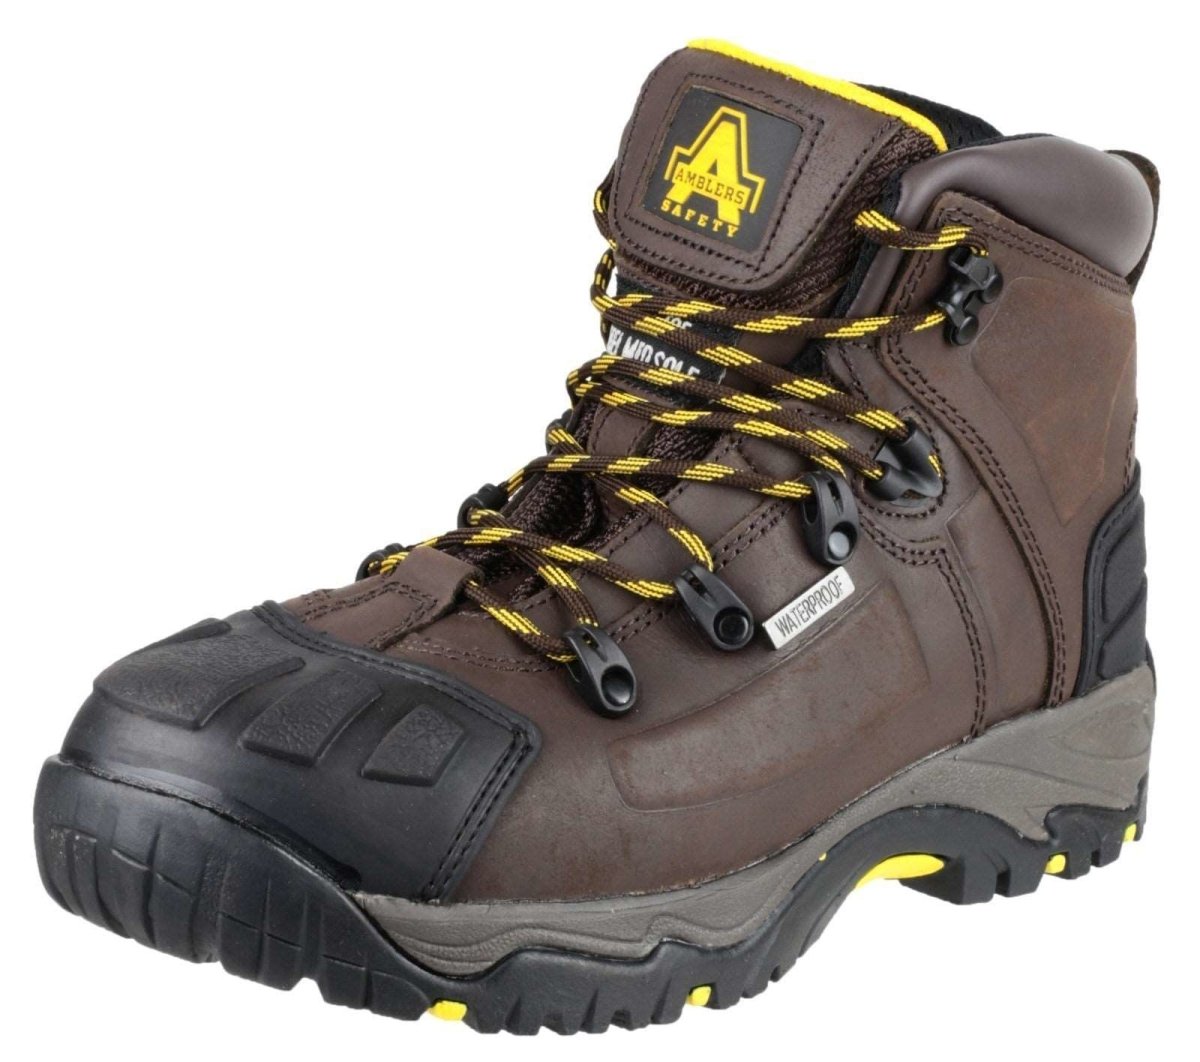 Amblers FS39 Waterproof Safety Boots - Shoe Store Direct